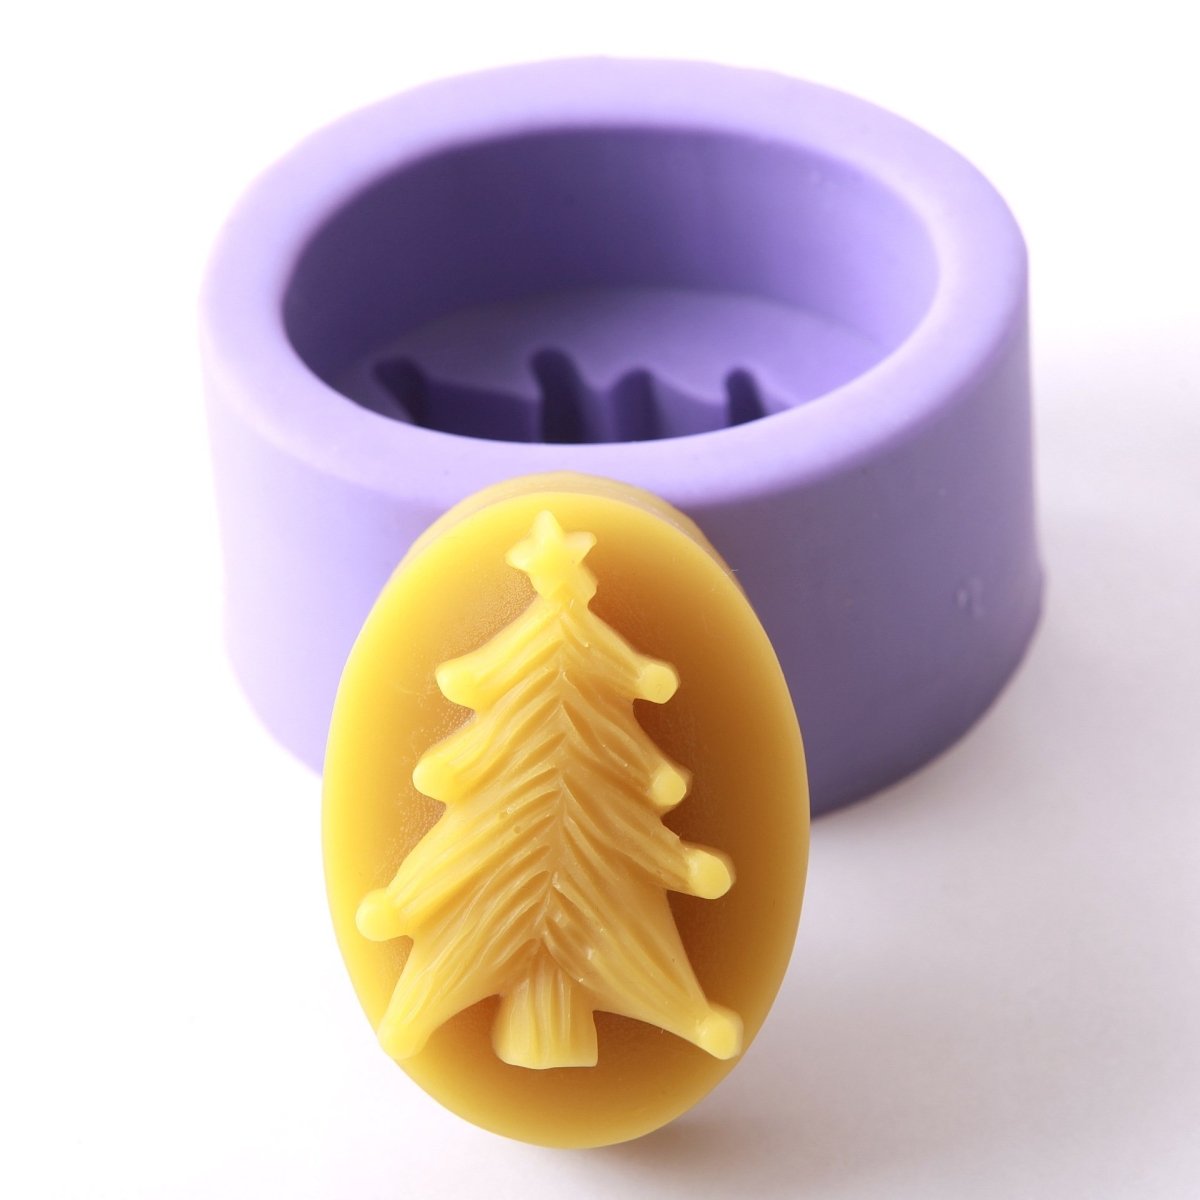 Embossed Christmas Tree Silicone Soap Mould R0084 - Mystic Moments UK